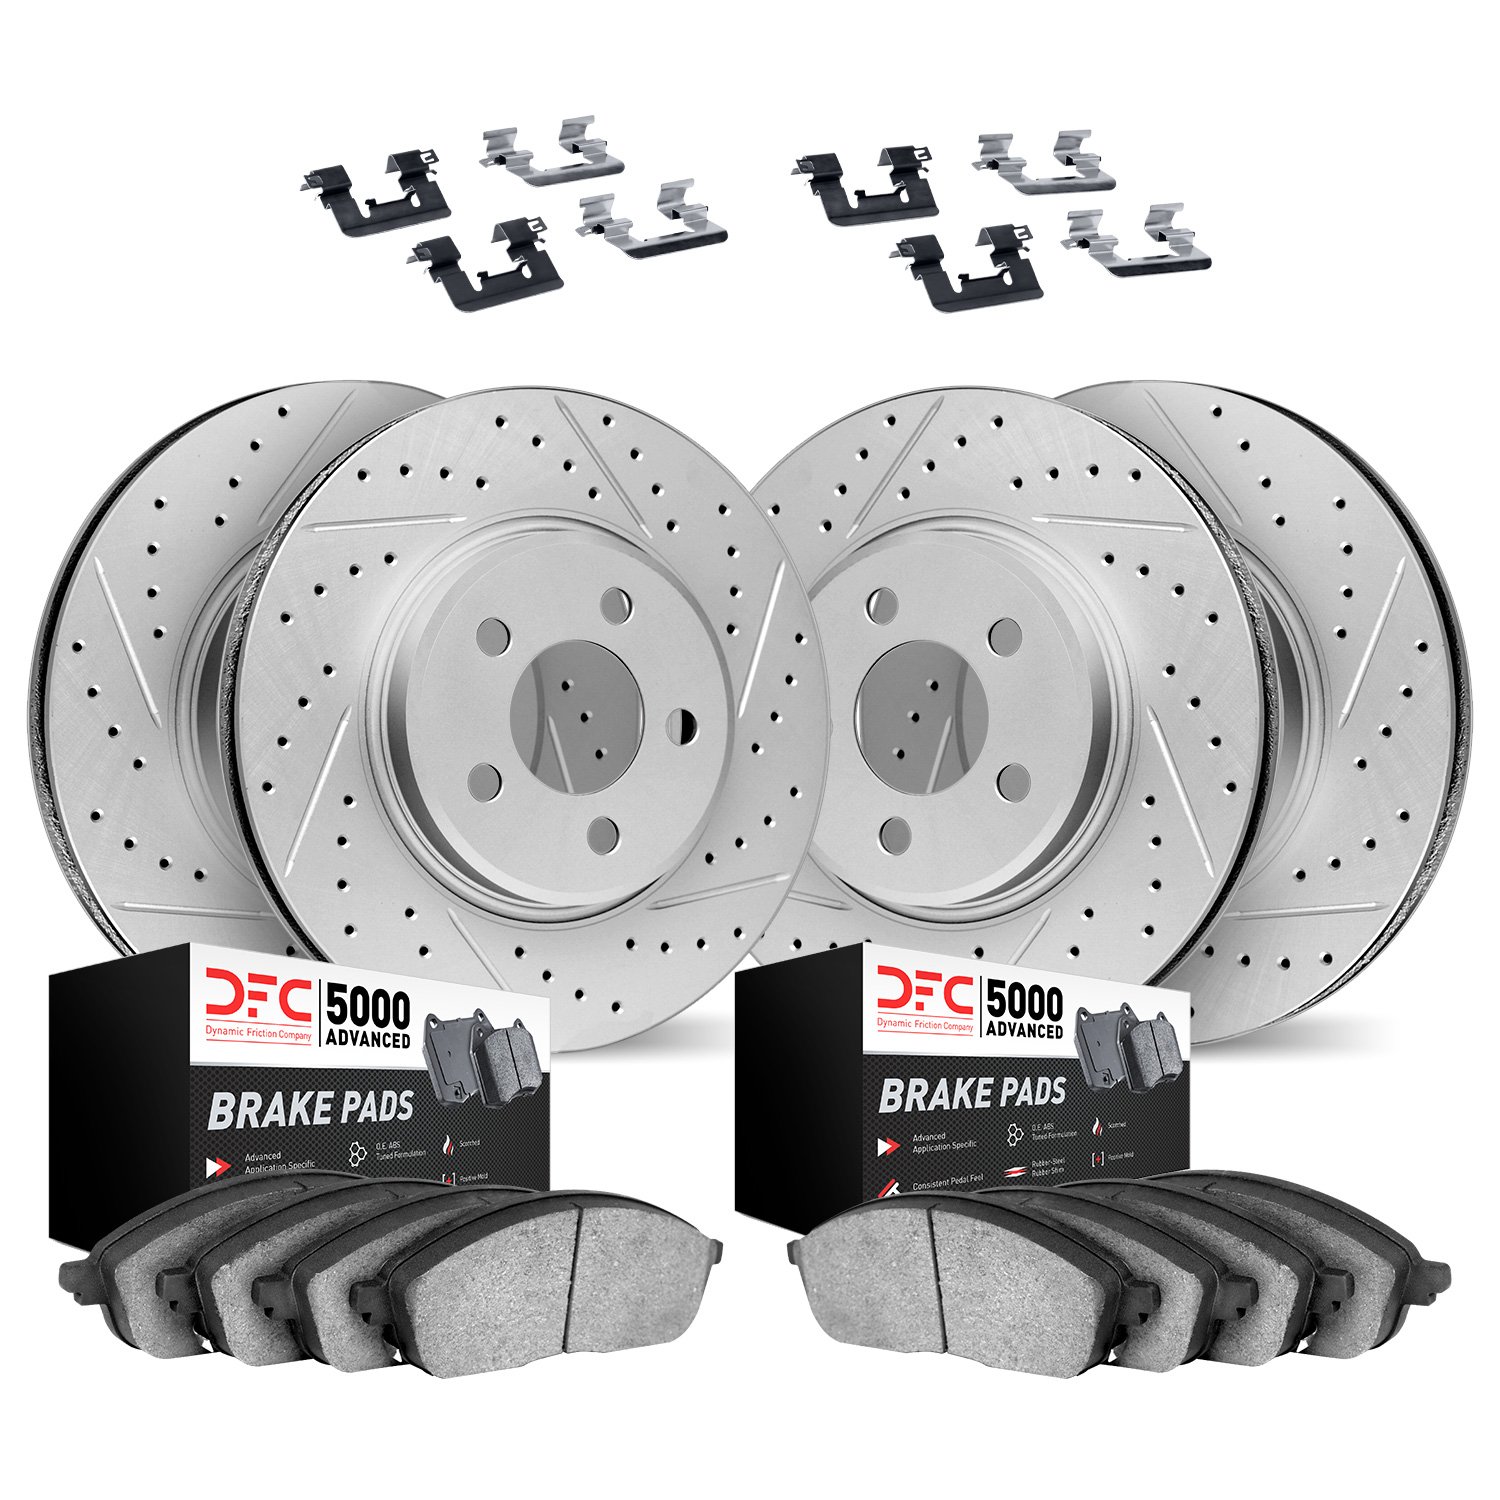 2514-13017 Geoperformance Drilled/Slotted Rotors w/5000 Advanced Brake Pads Kit & Hardware, Fits Select Subaru, Position: Front